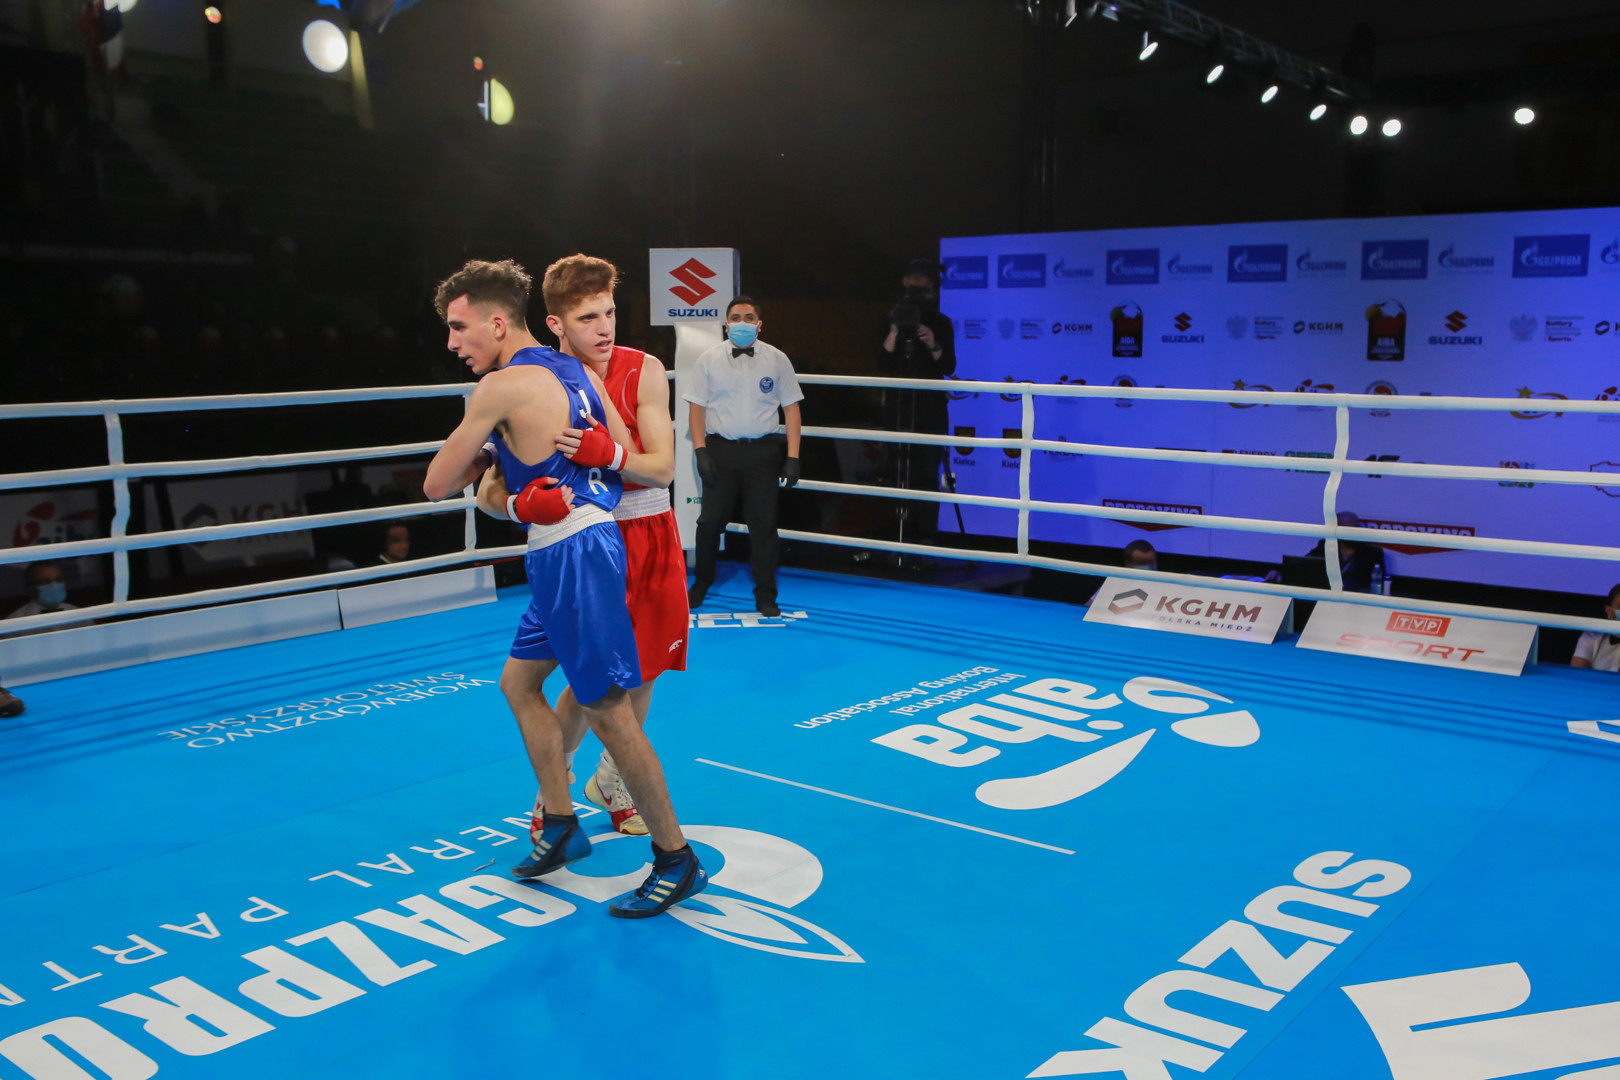 There is plenty of good sportsmanship on display at the Championships ©AIBA